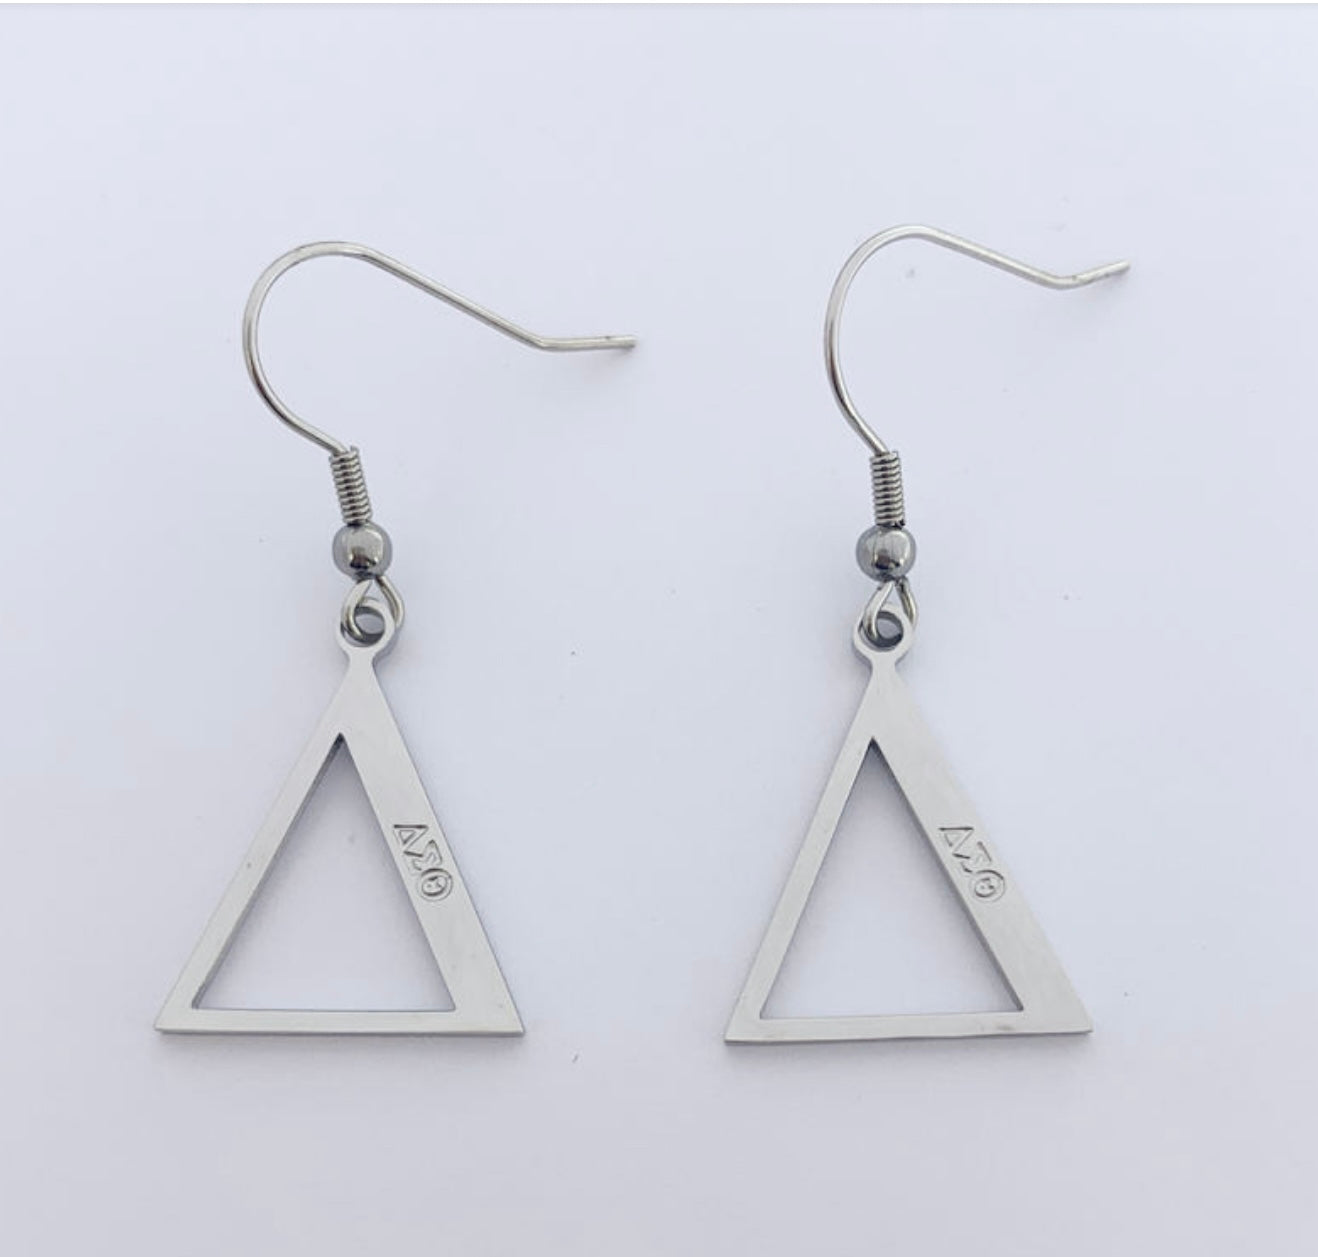 Stainless Steel Geometric Triangle earrings with engraved DST symbols